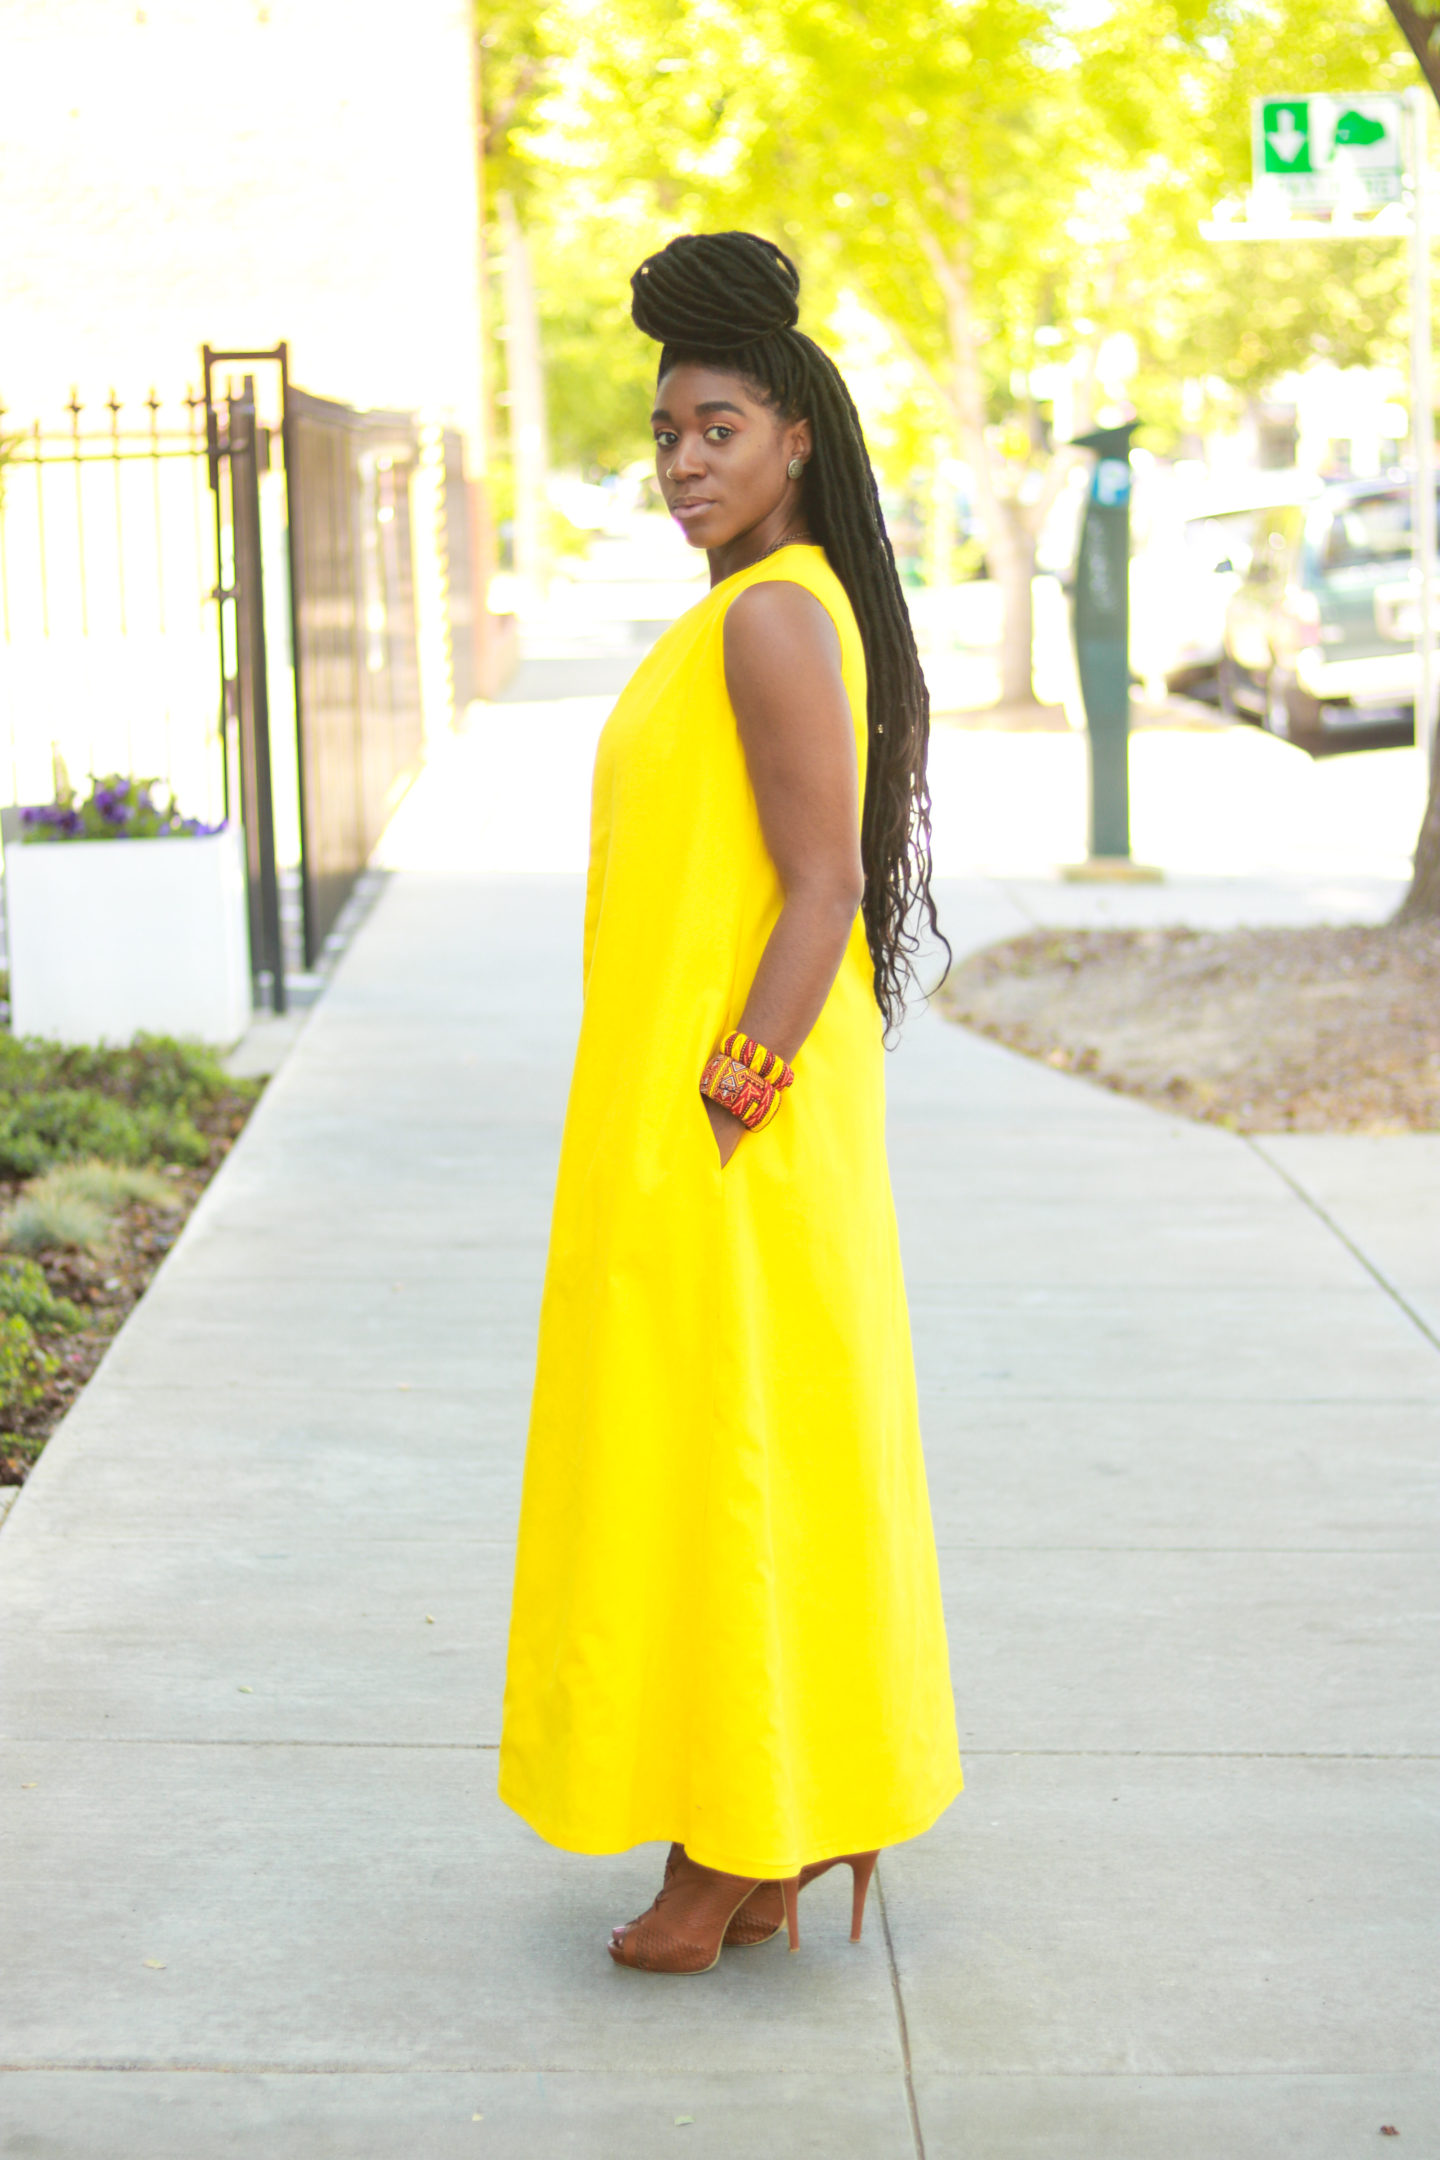 DIY Sleeveless Duster with a Lining and Fabric Review - Montoya Mayo